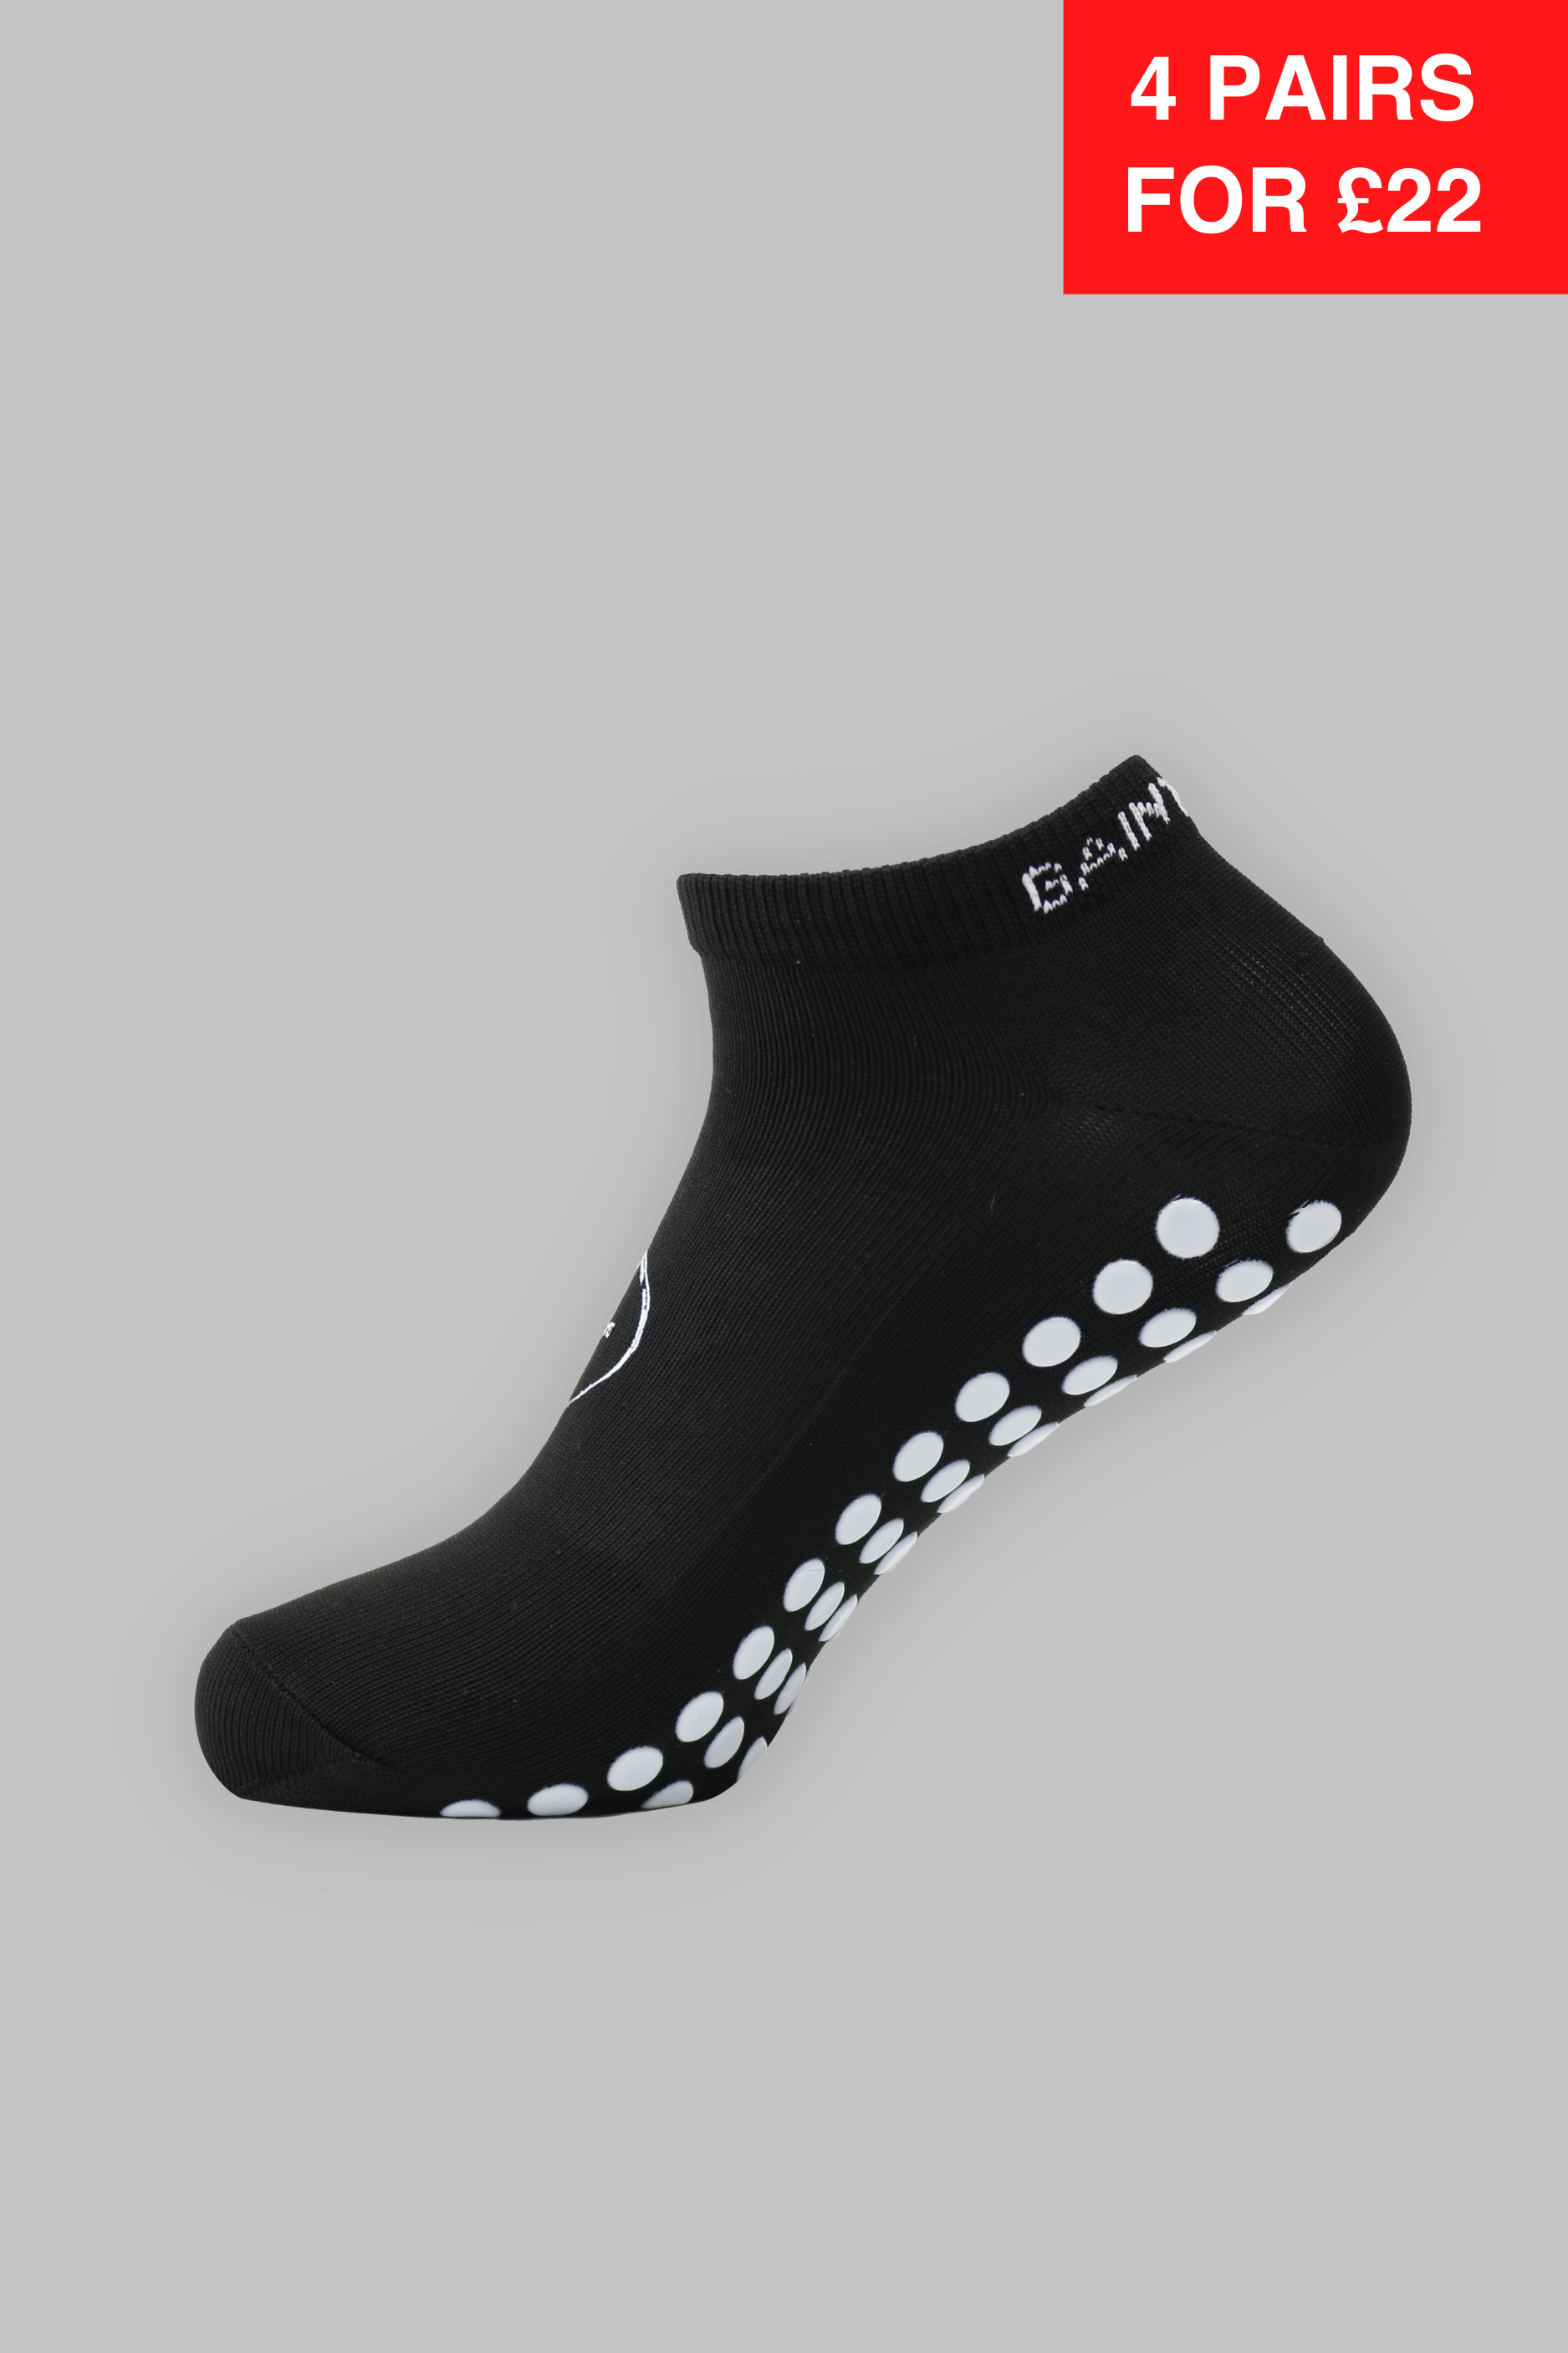 WHITEOUT LIMITED EDITION GRIP SOCKS 2.0